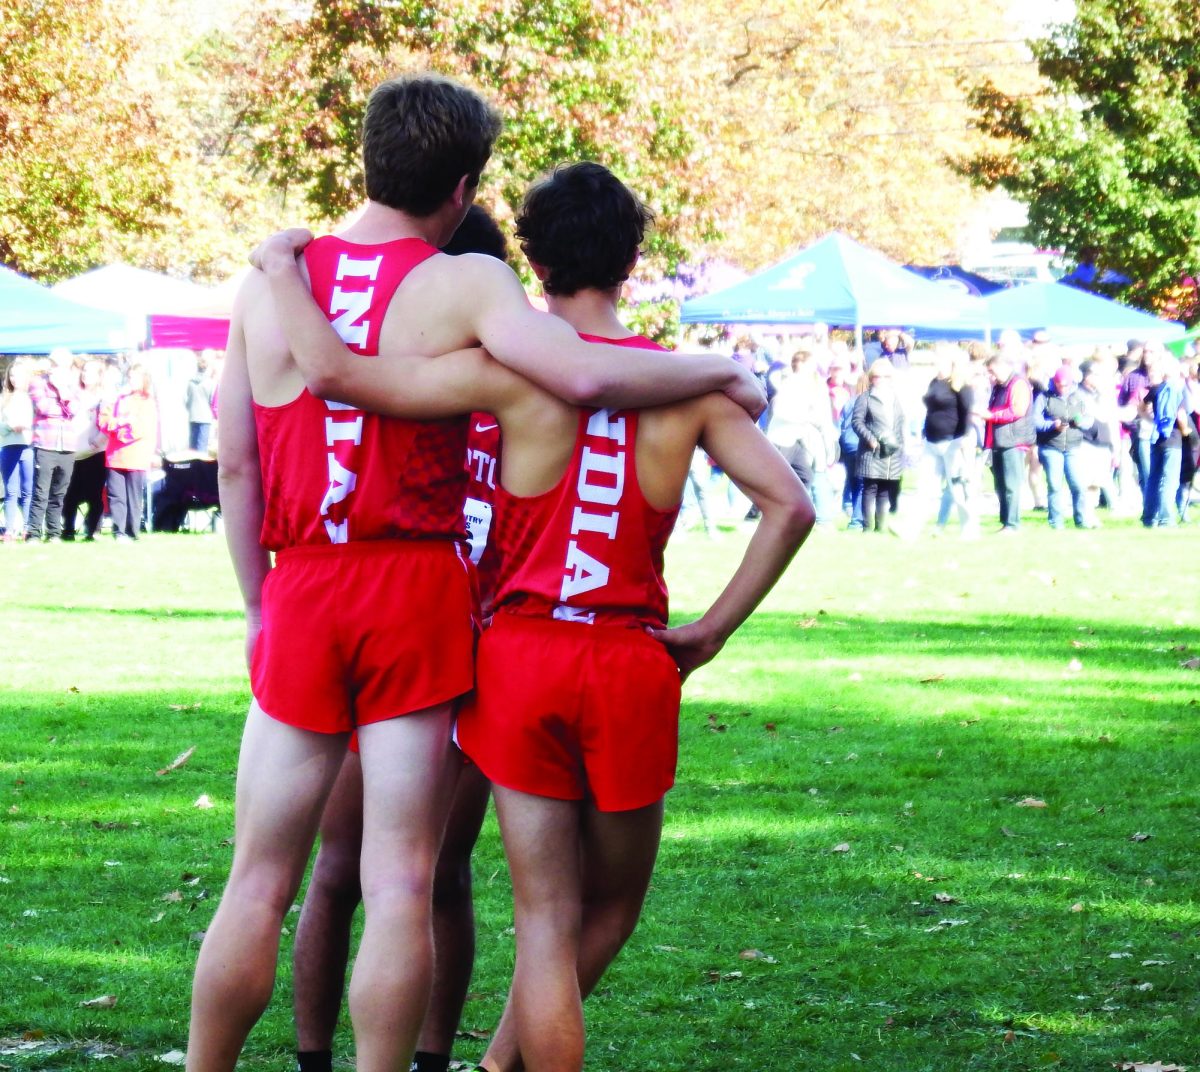 Together+we%E2%80%99re+stronger%E2%80%A6Whilst+preparing+for+their+PIAA+state+race%2C+senior+James+Kuduk+%28right%29+and+senior+Aidan+Kearns+showcase+their+bond.+Souderton+placed+fourth+in+the+state+while+Kuduk+and+Kearns+both+finished+with+course+personal+records+and+placed+25th+and+41st%2C+respectively.